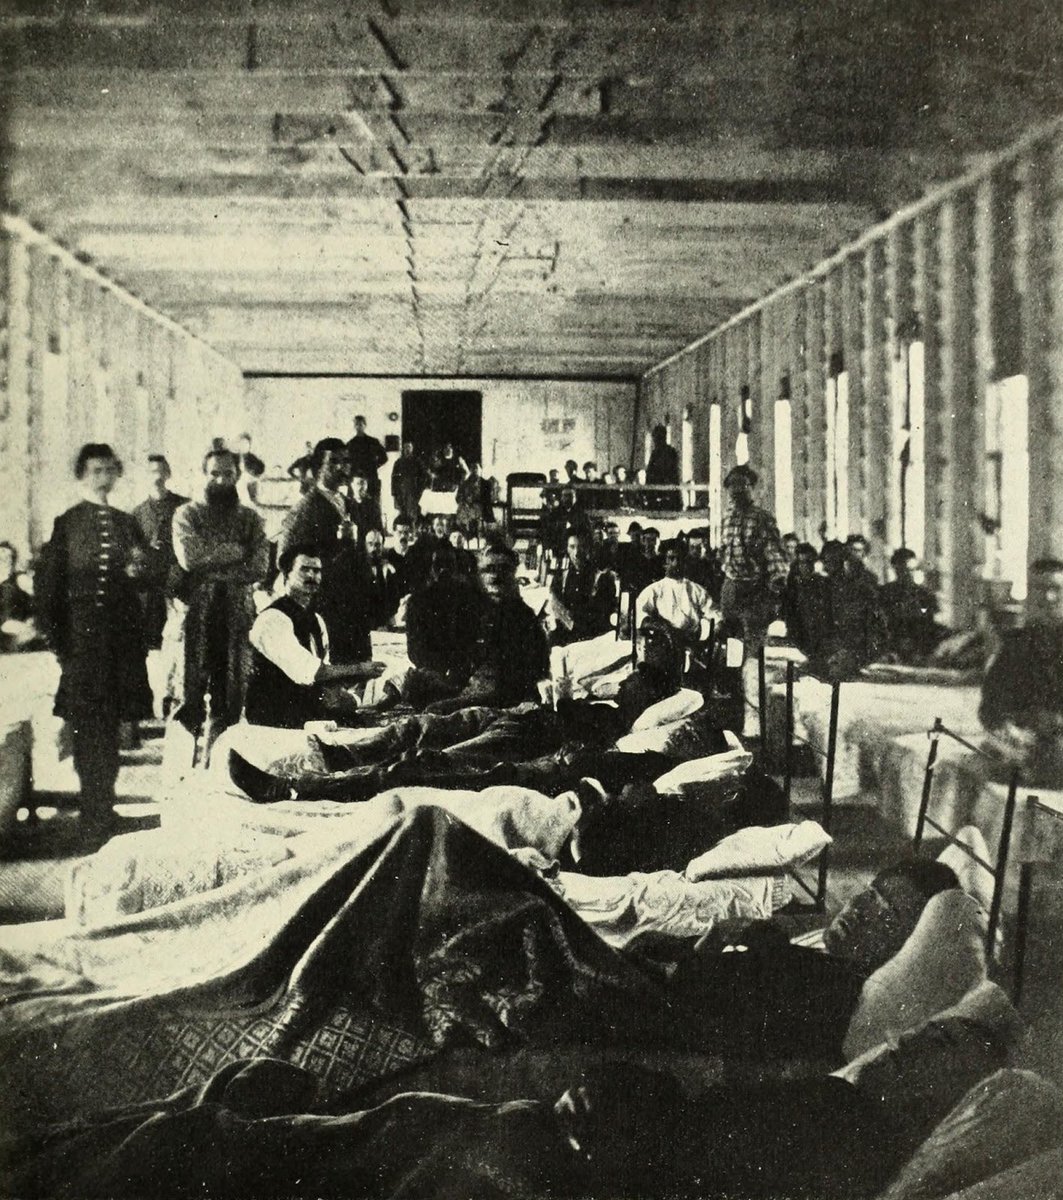 A black and white photograph showing civil war soldiers convalescing in a makeshift hospital. It looks very cramped and grim. There are many men in the image, some are lying in bed, others are walking around.